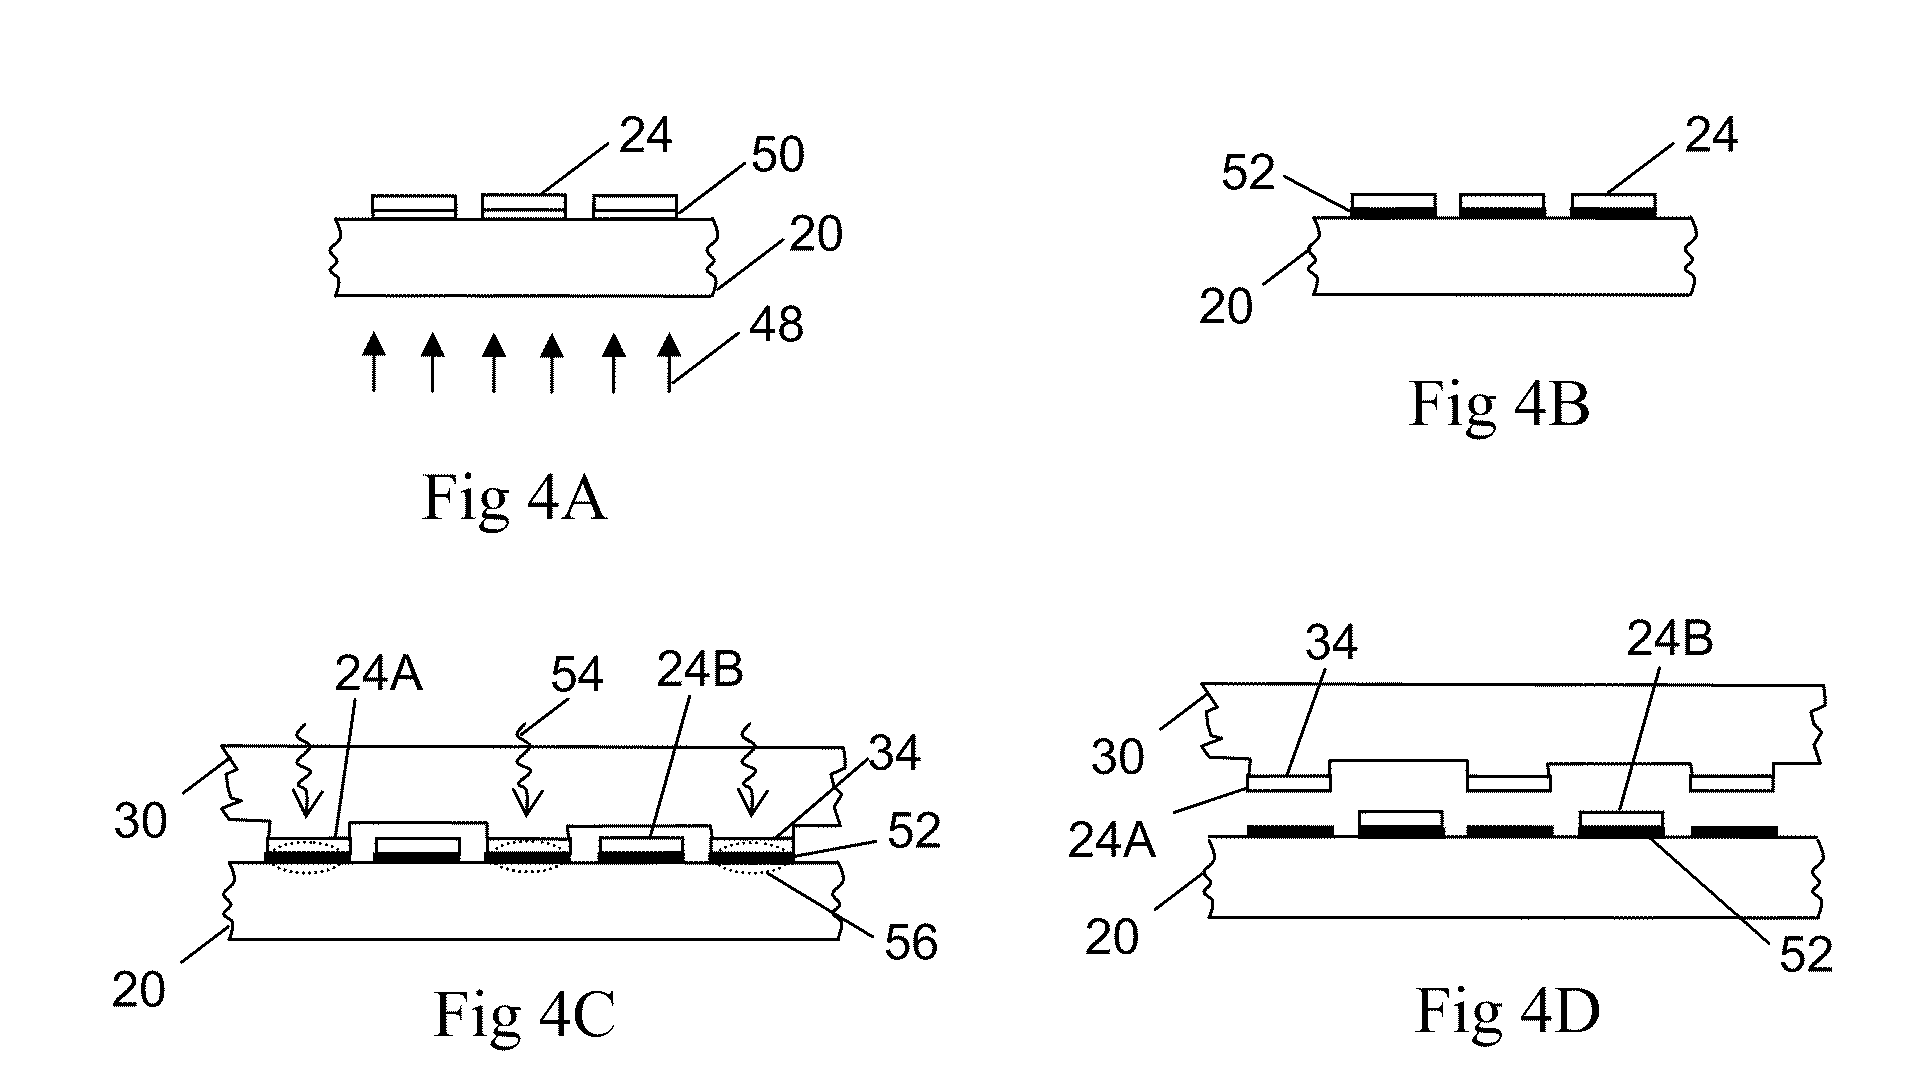 Method of manufacturing transferable elements incorporating radiation enabled lift off for allowing transfer from host substrate